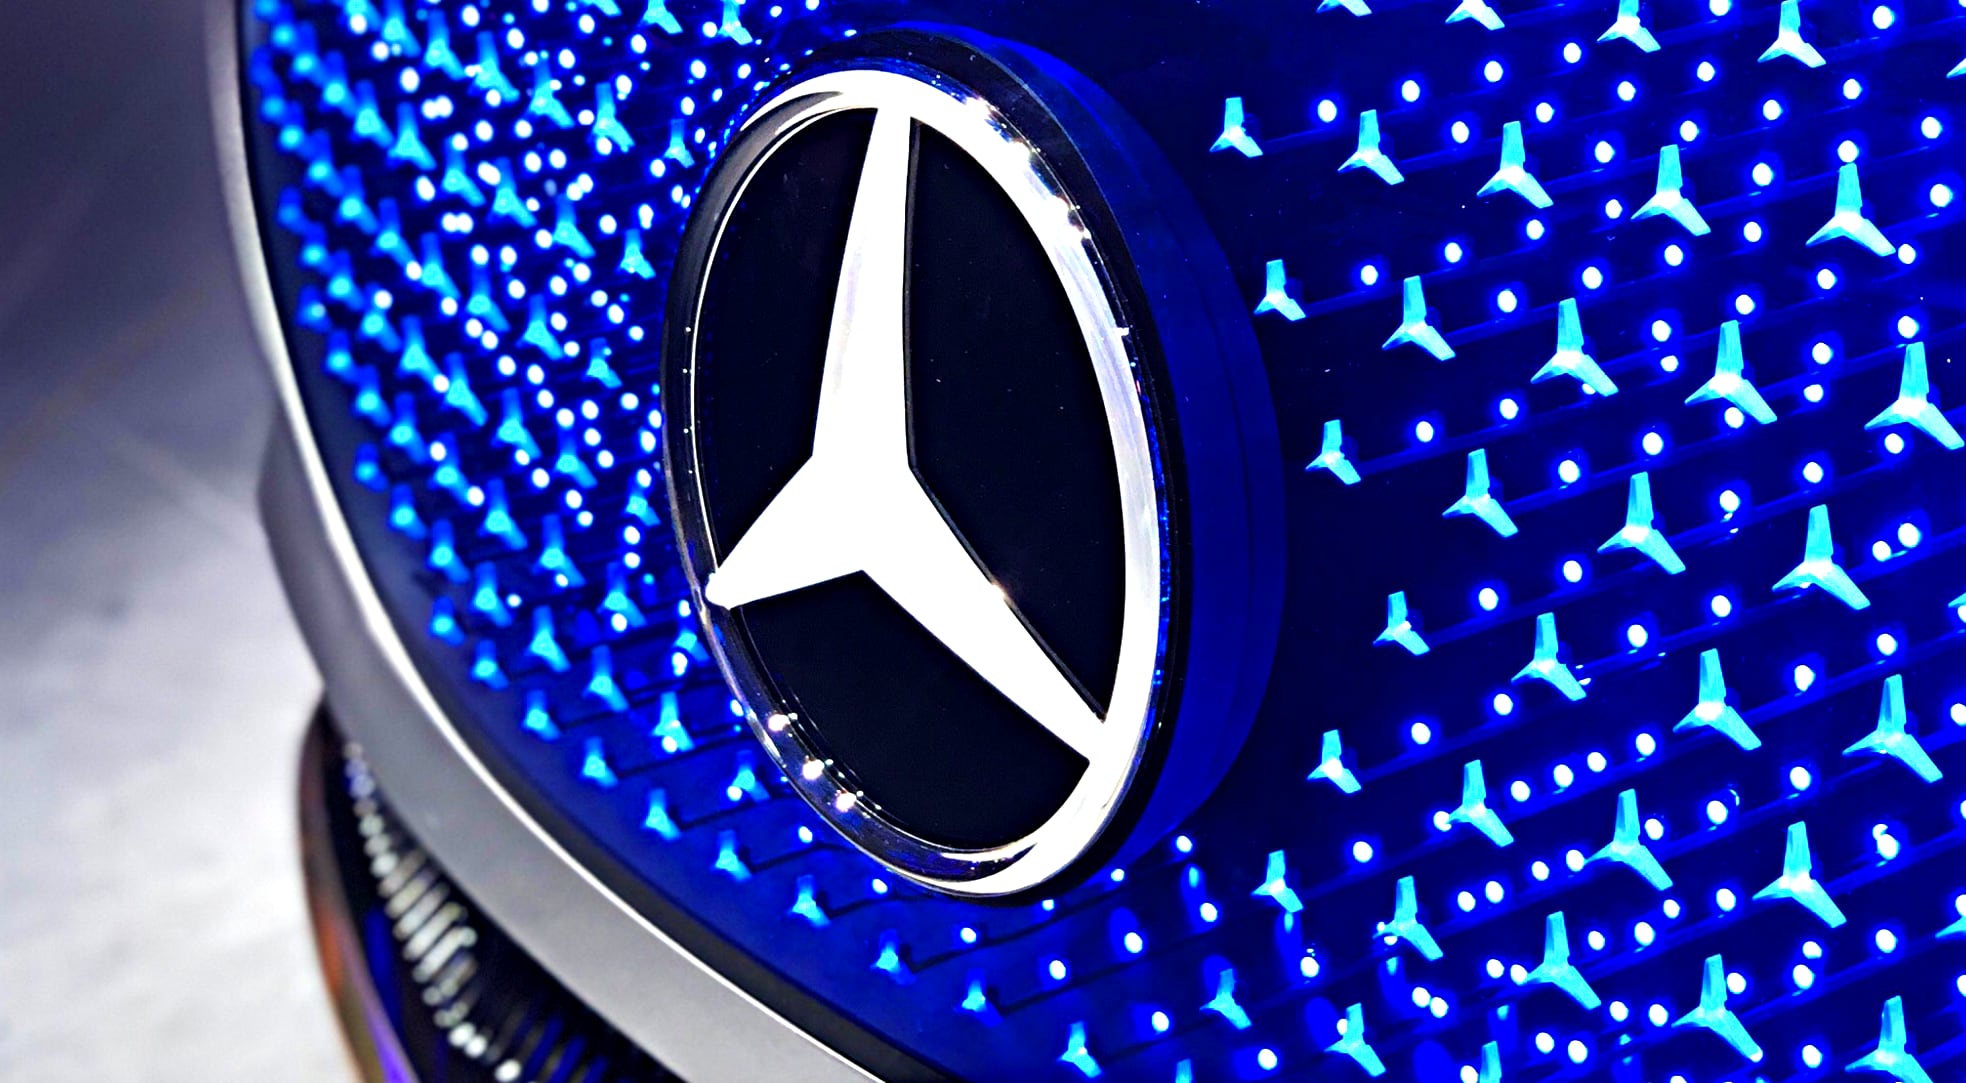 The Mercedes-Benz Logo Is A Simple And Modern Design That Radiates